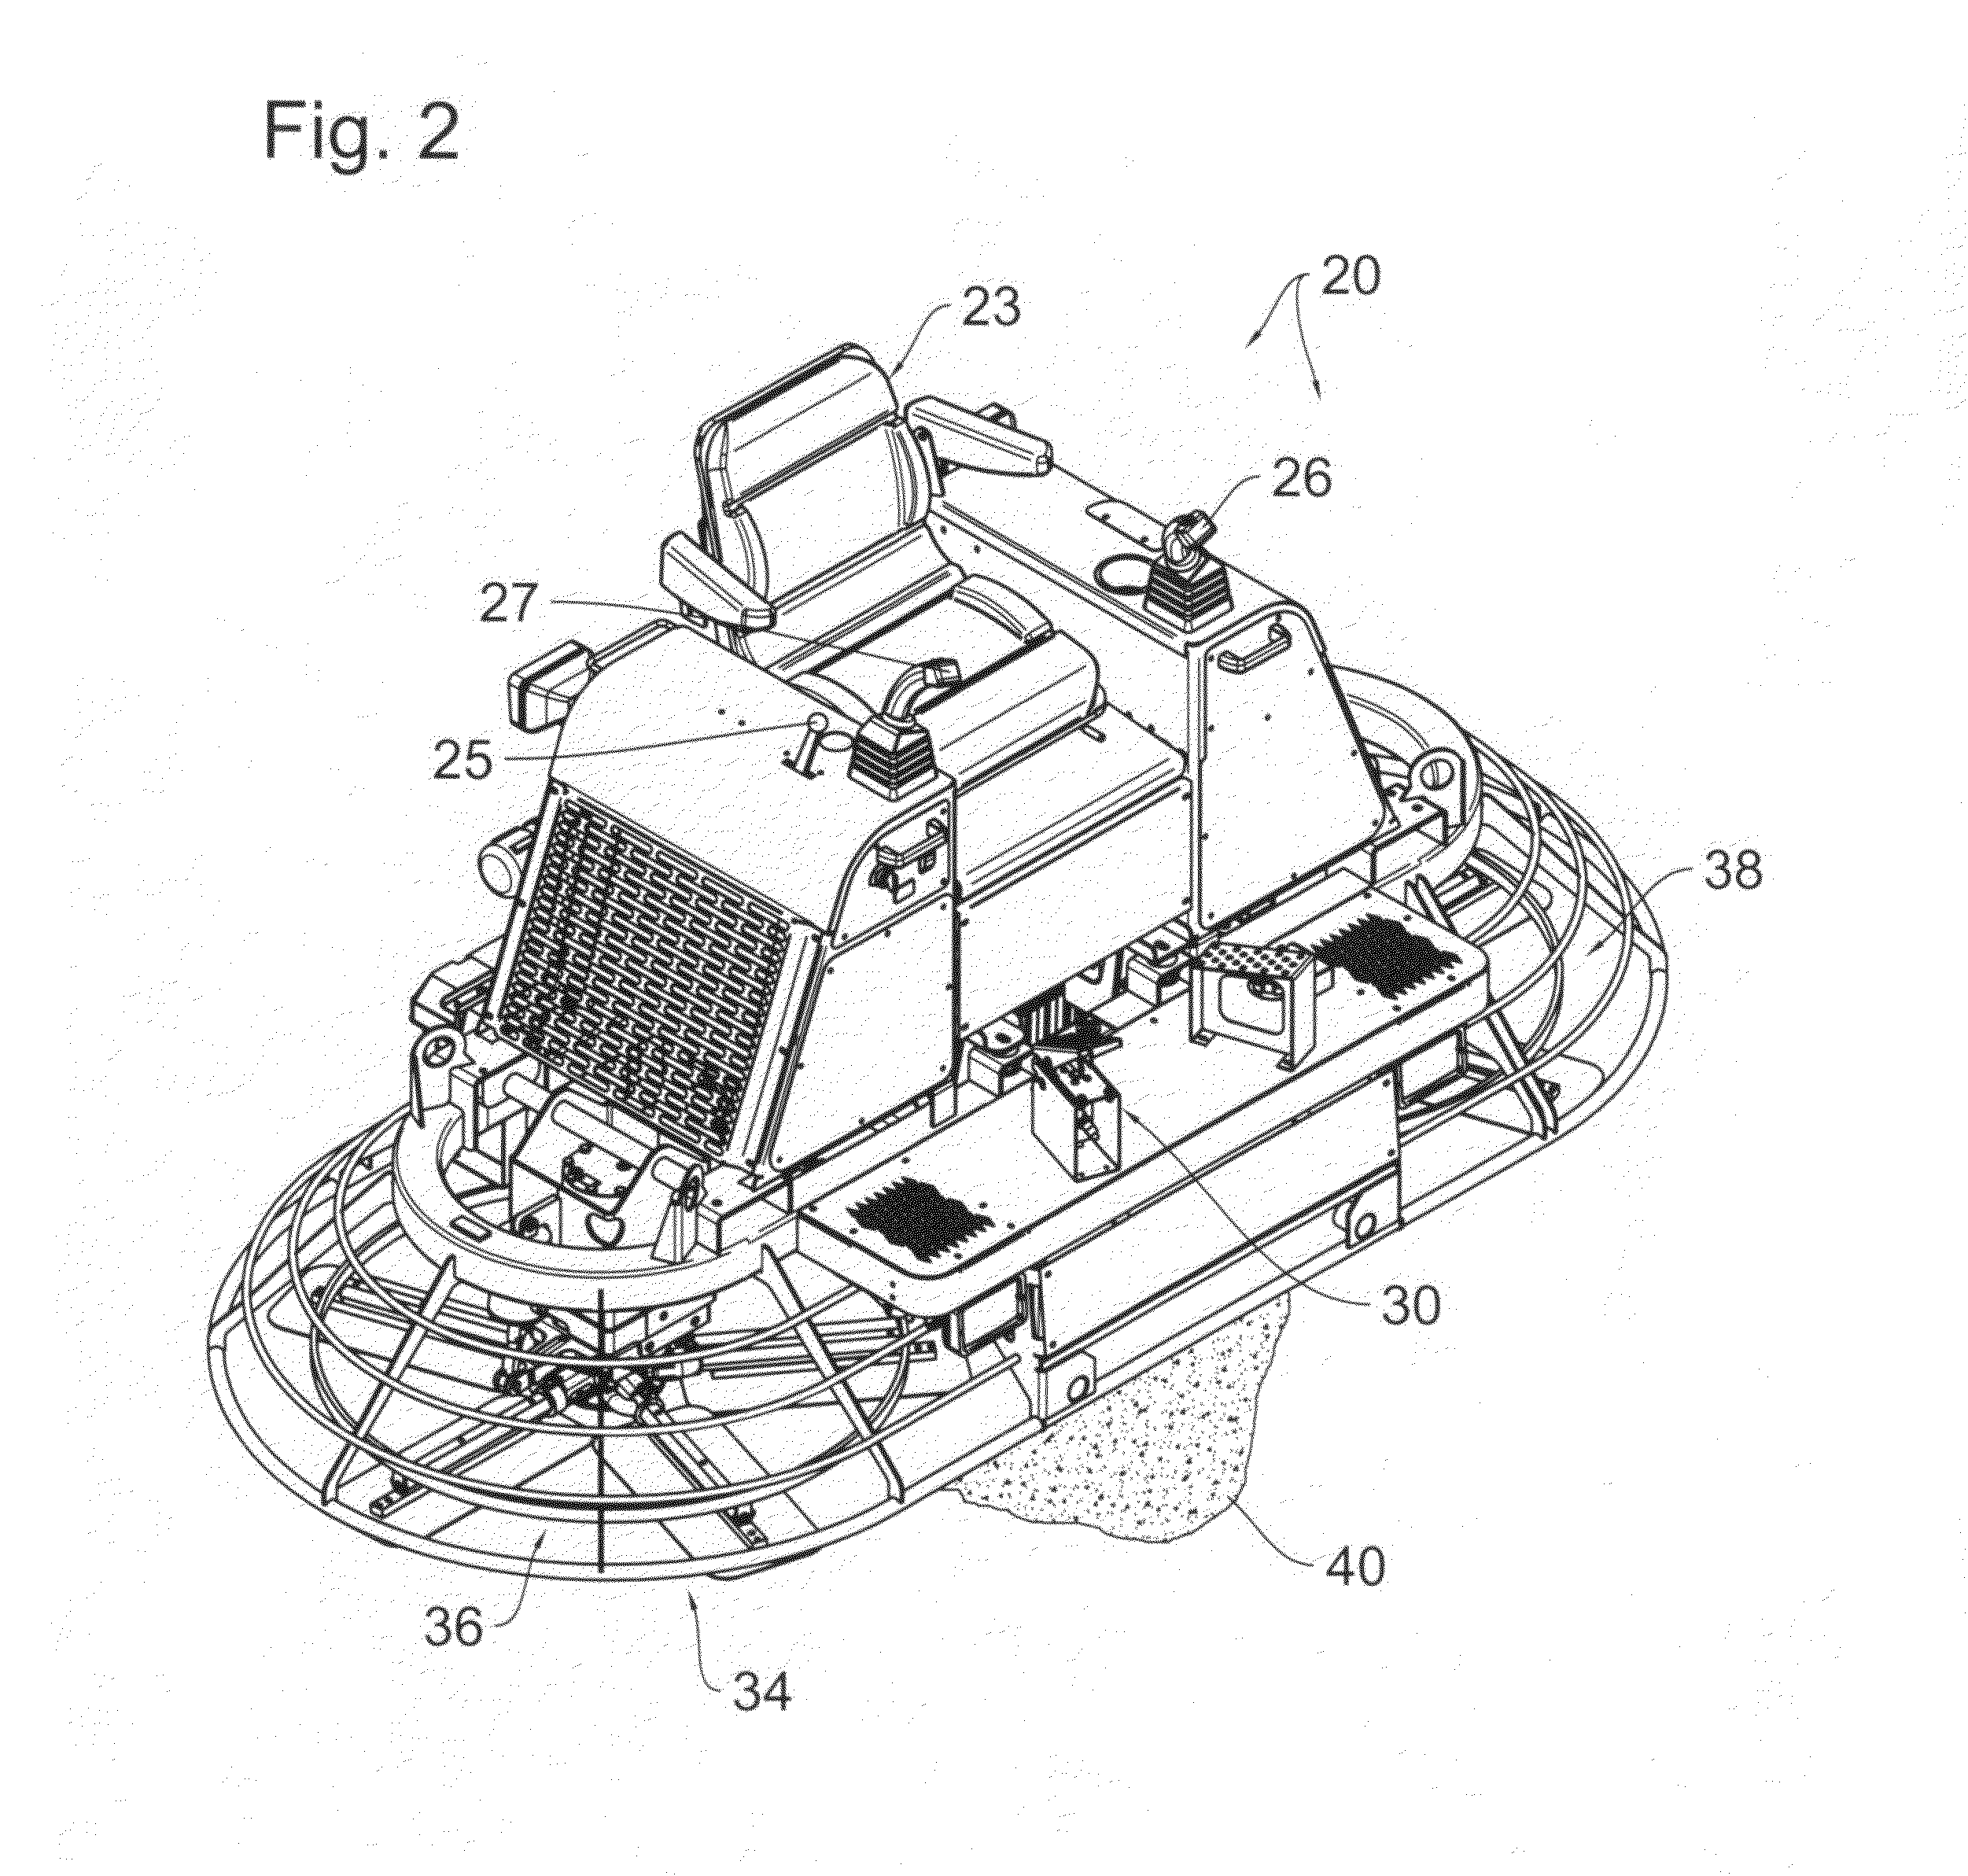 Hydraulic riding trowels with automatic load sensing